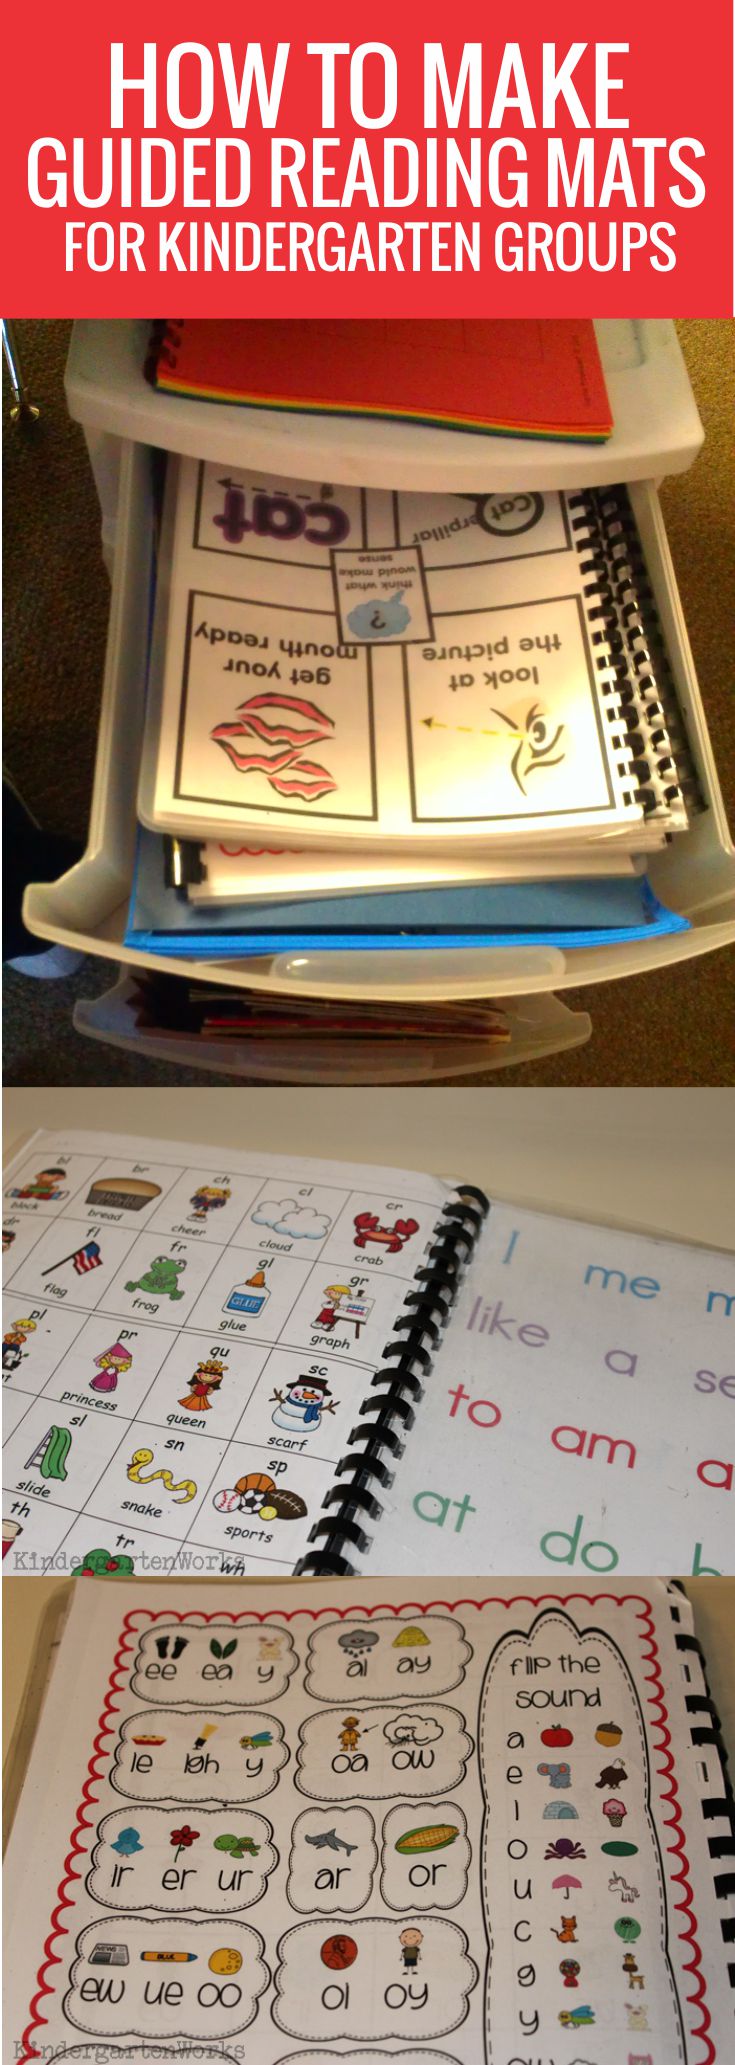 How to Make Guided Reading Mats for Kindergarten Groups